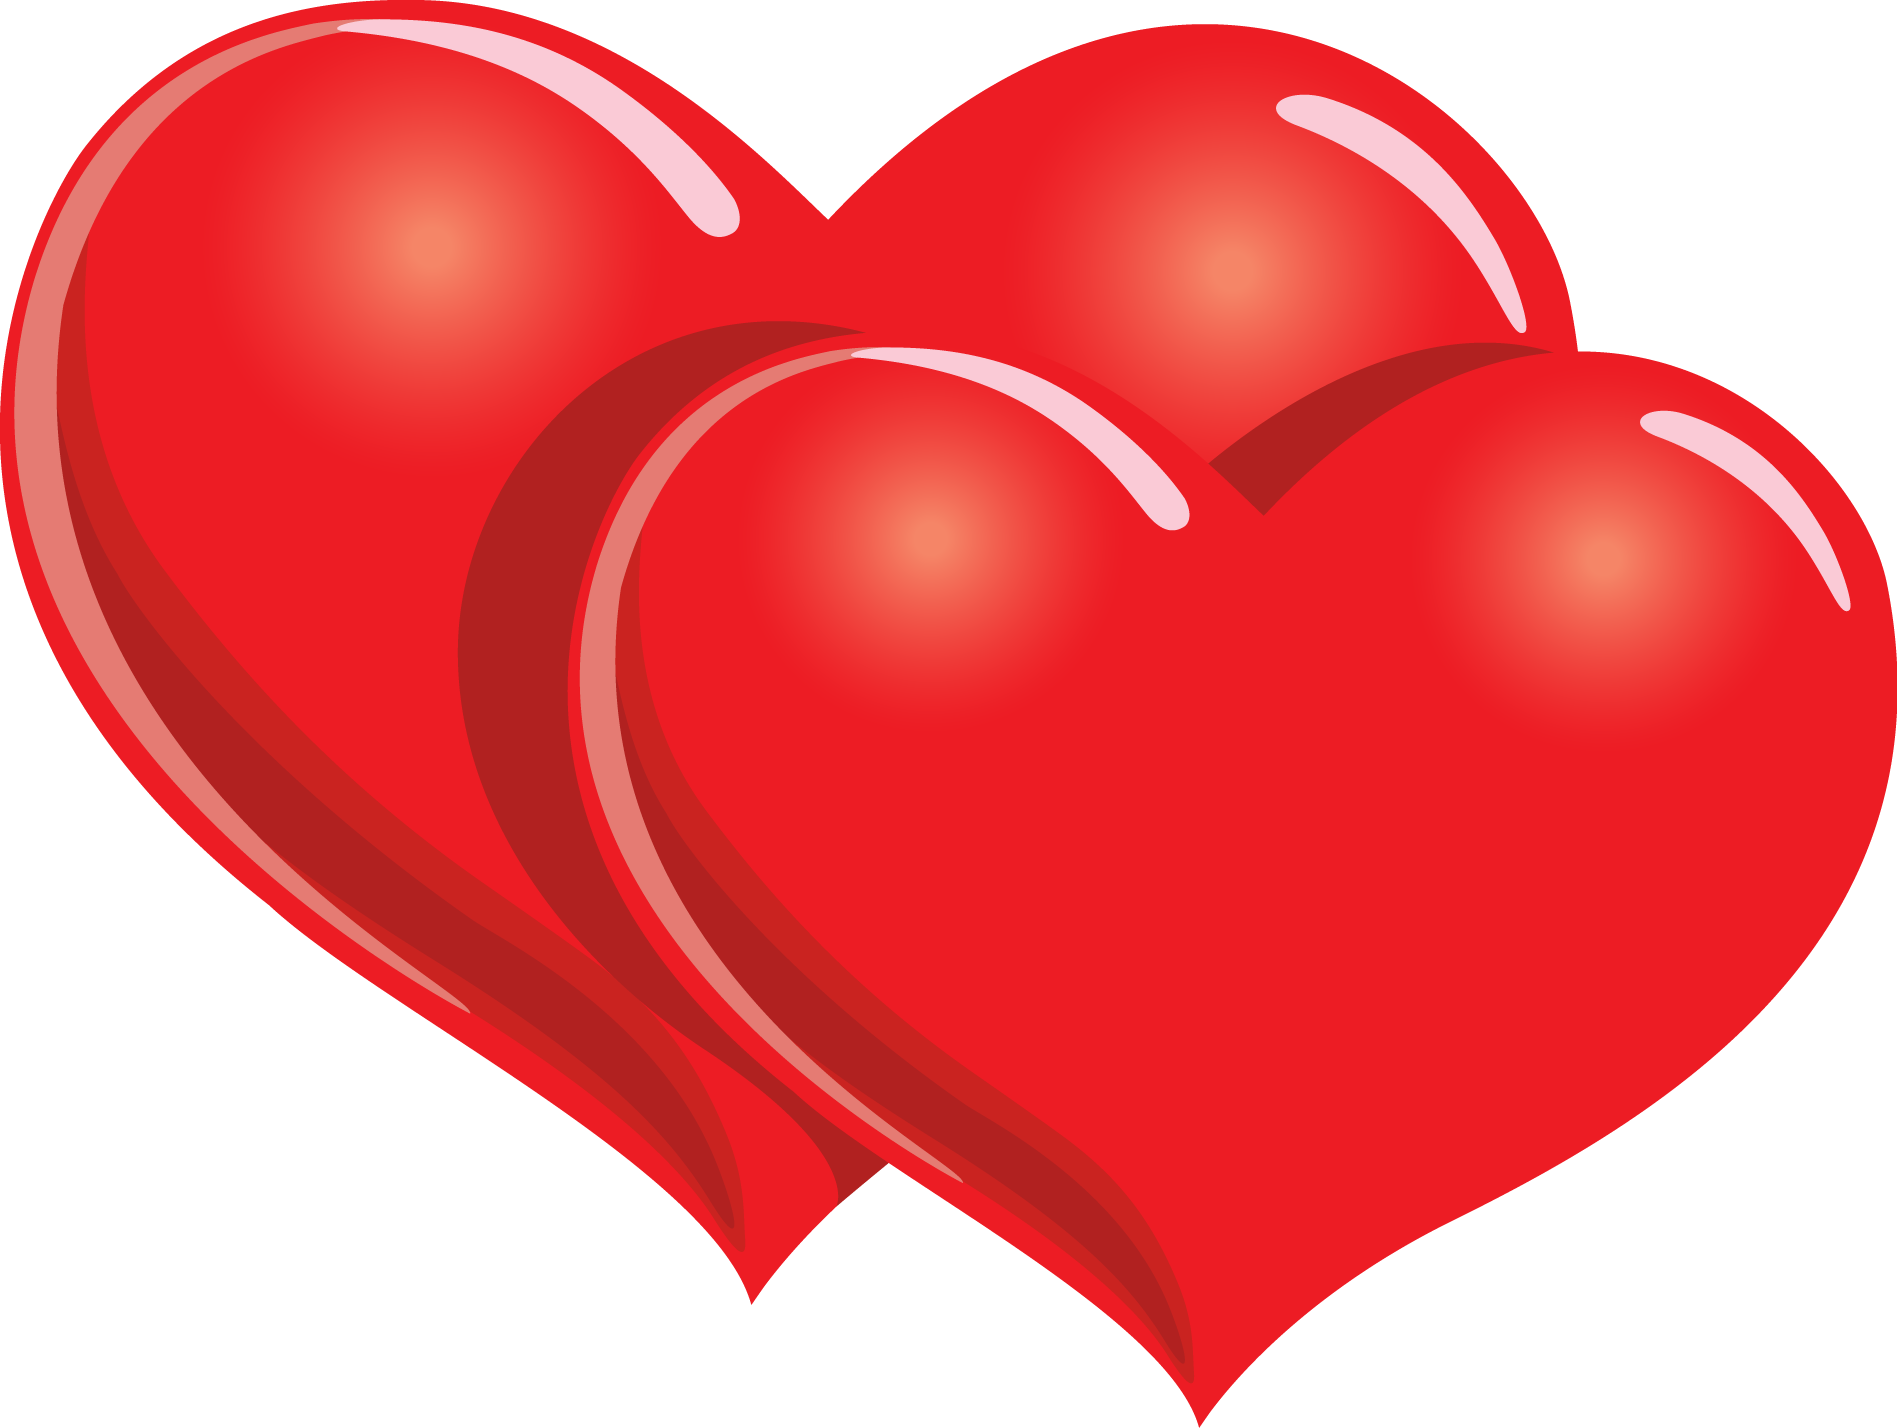 Two Hearts Clipart - Free Clipart Images